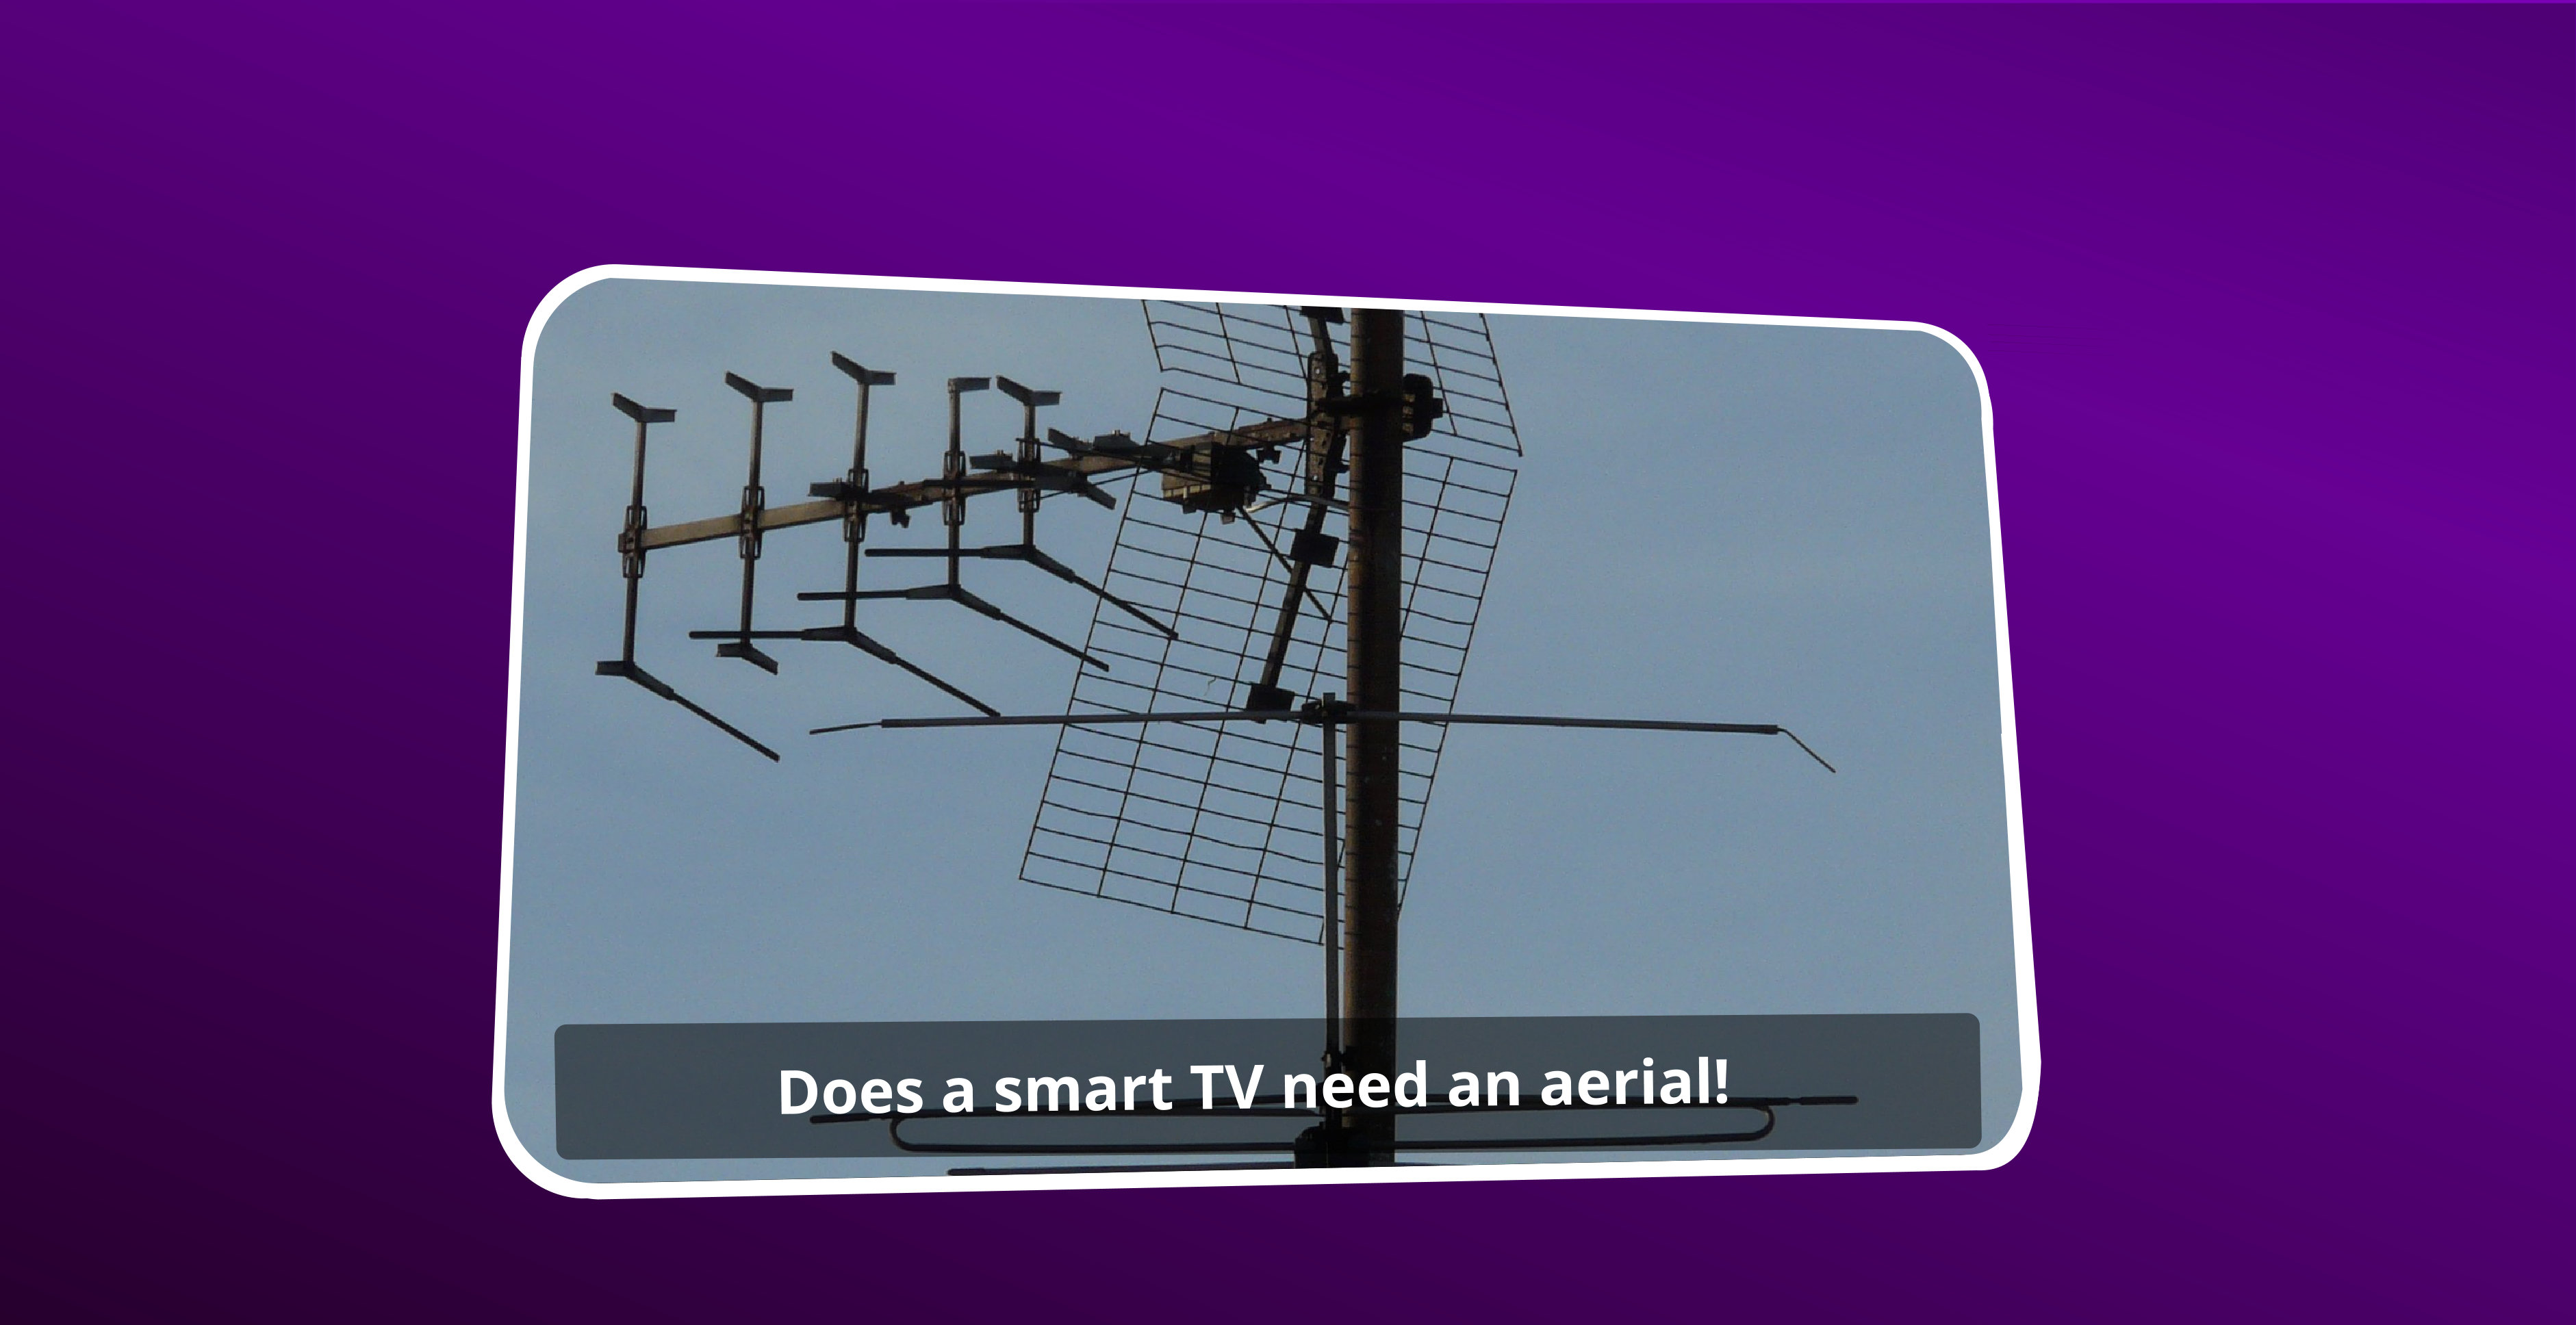 Does a smart TV need an aerial